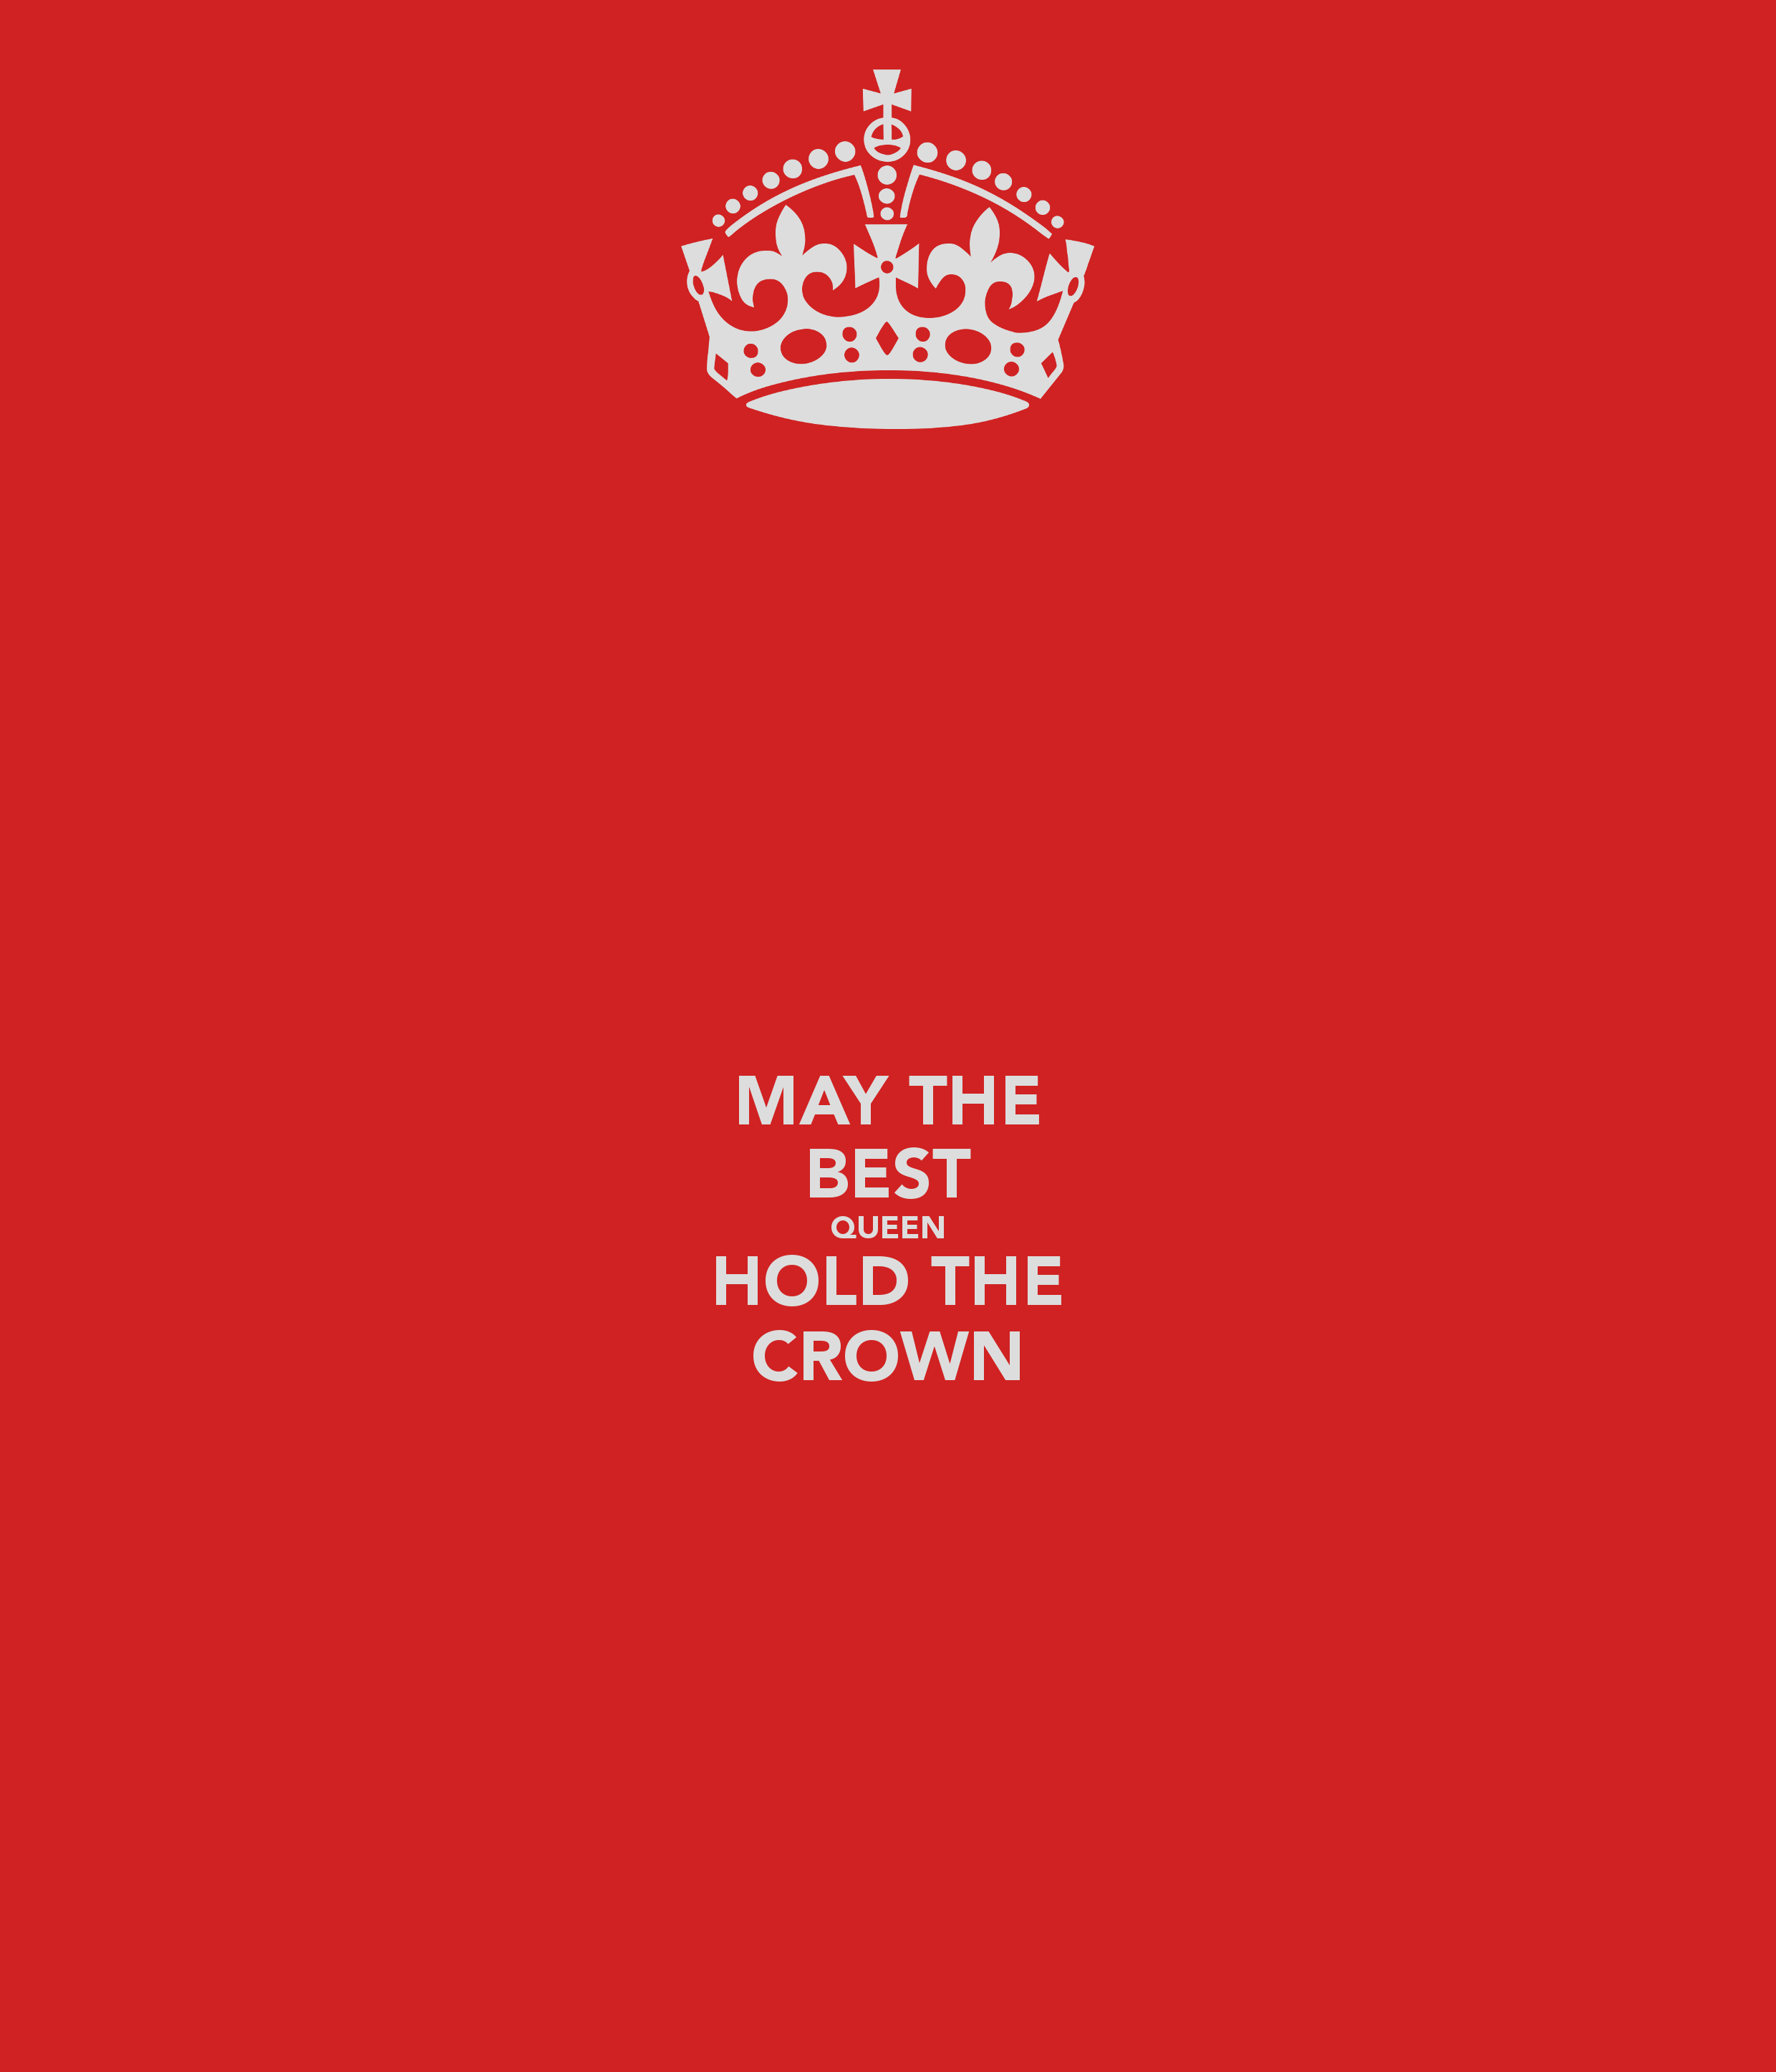 MAY THE BEST QUEEN HOLD THE CROWN - KEEP CALM AND CARRY ON Image ...